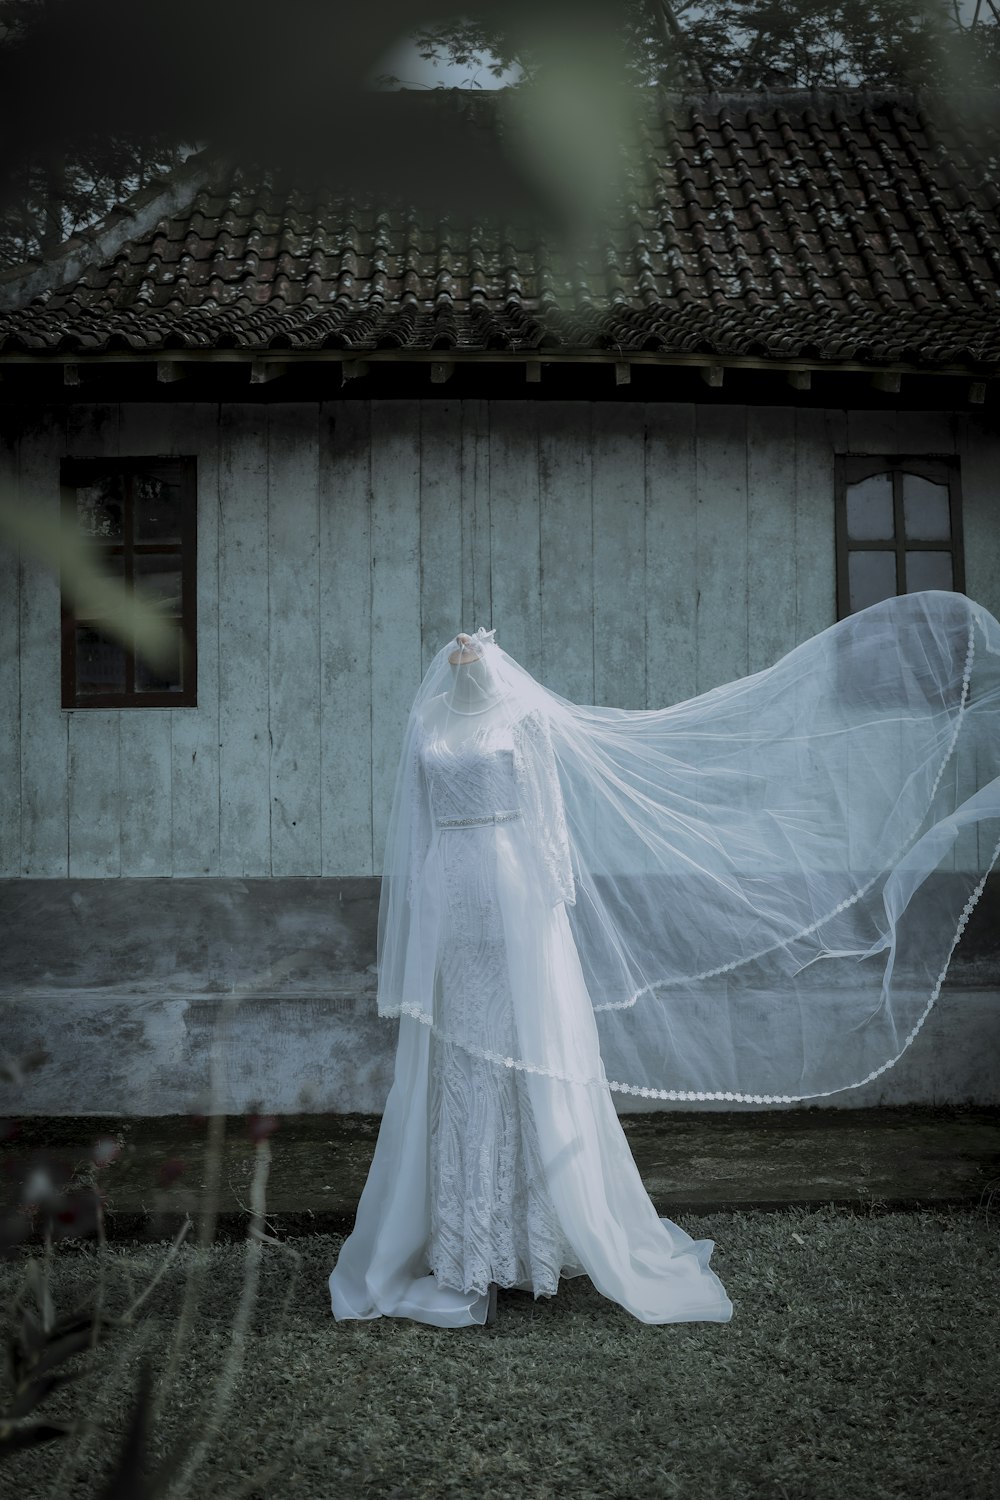 a woman in a wedding dress with a veil